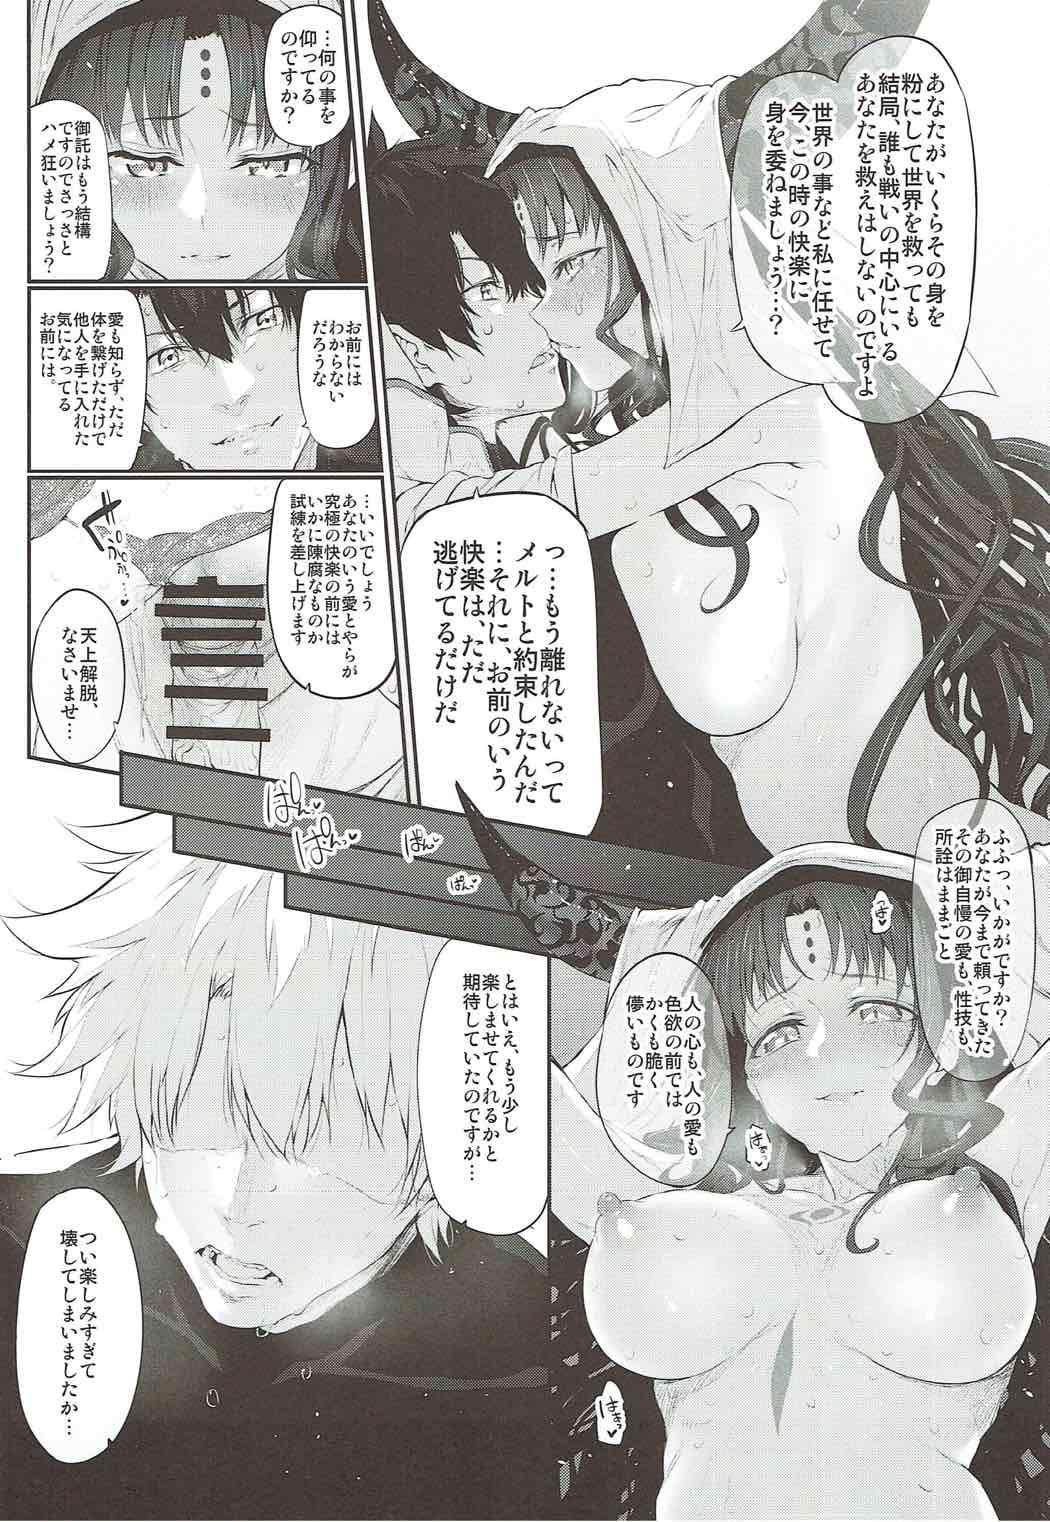 Indo Marked Girls Vol. 15 - Fate grand order Pau - Page 9